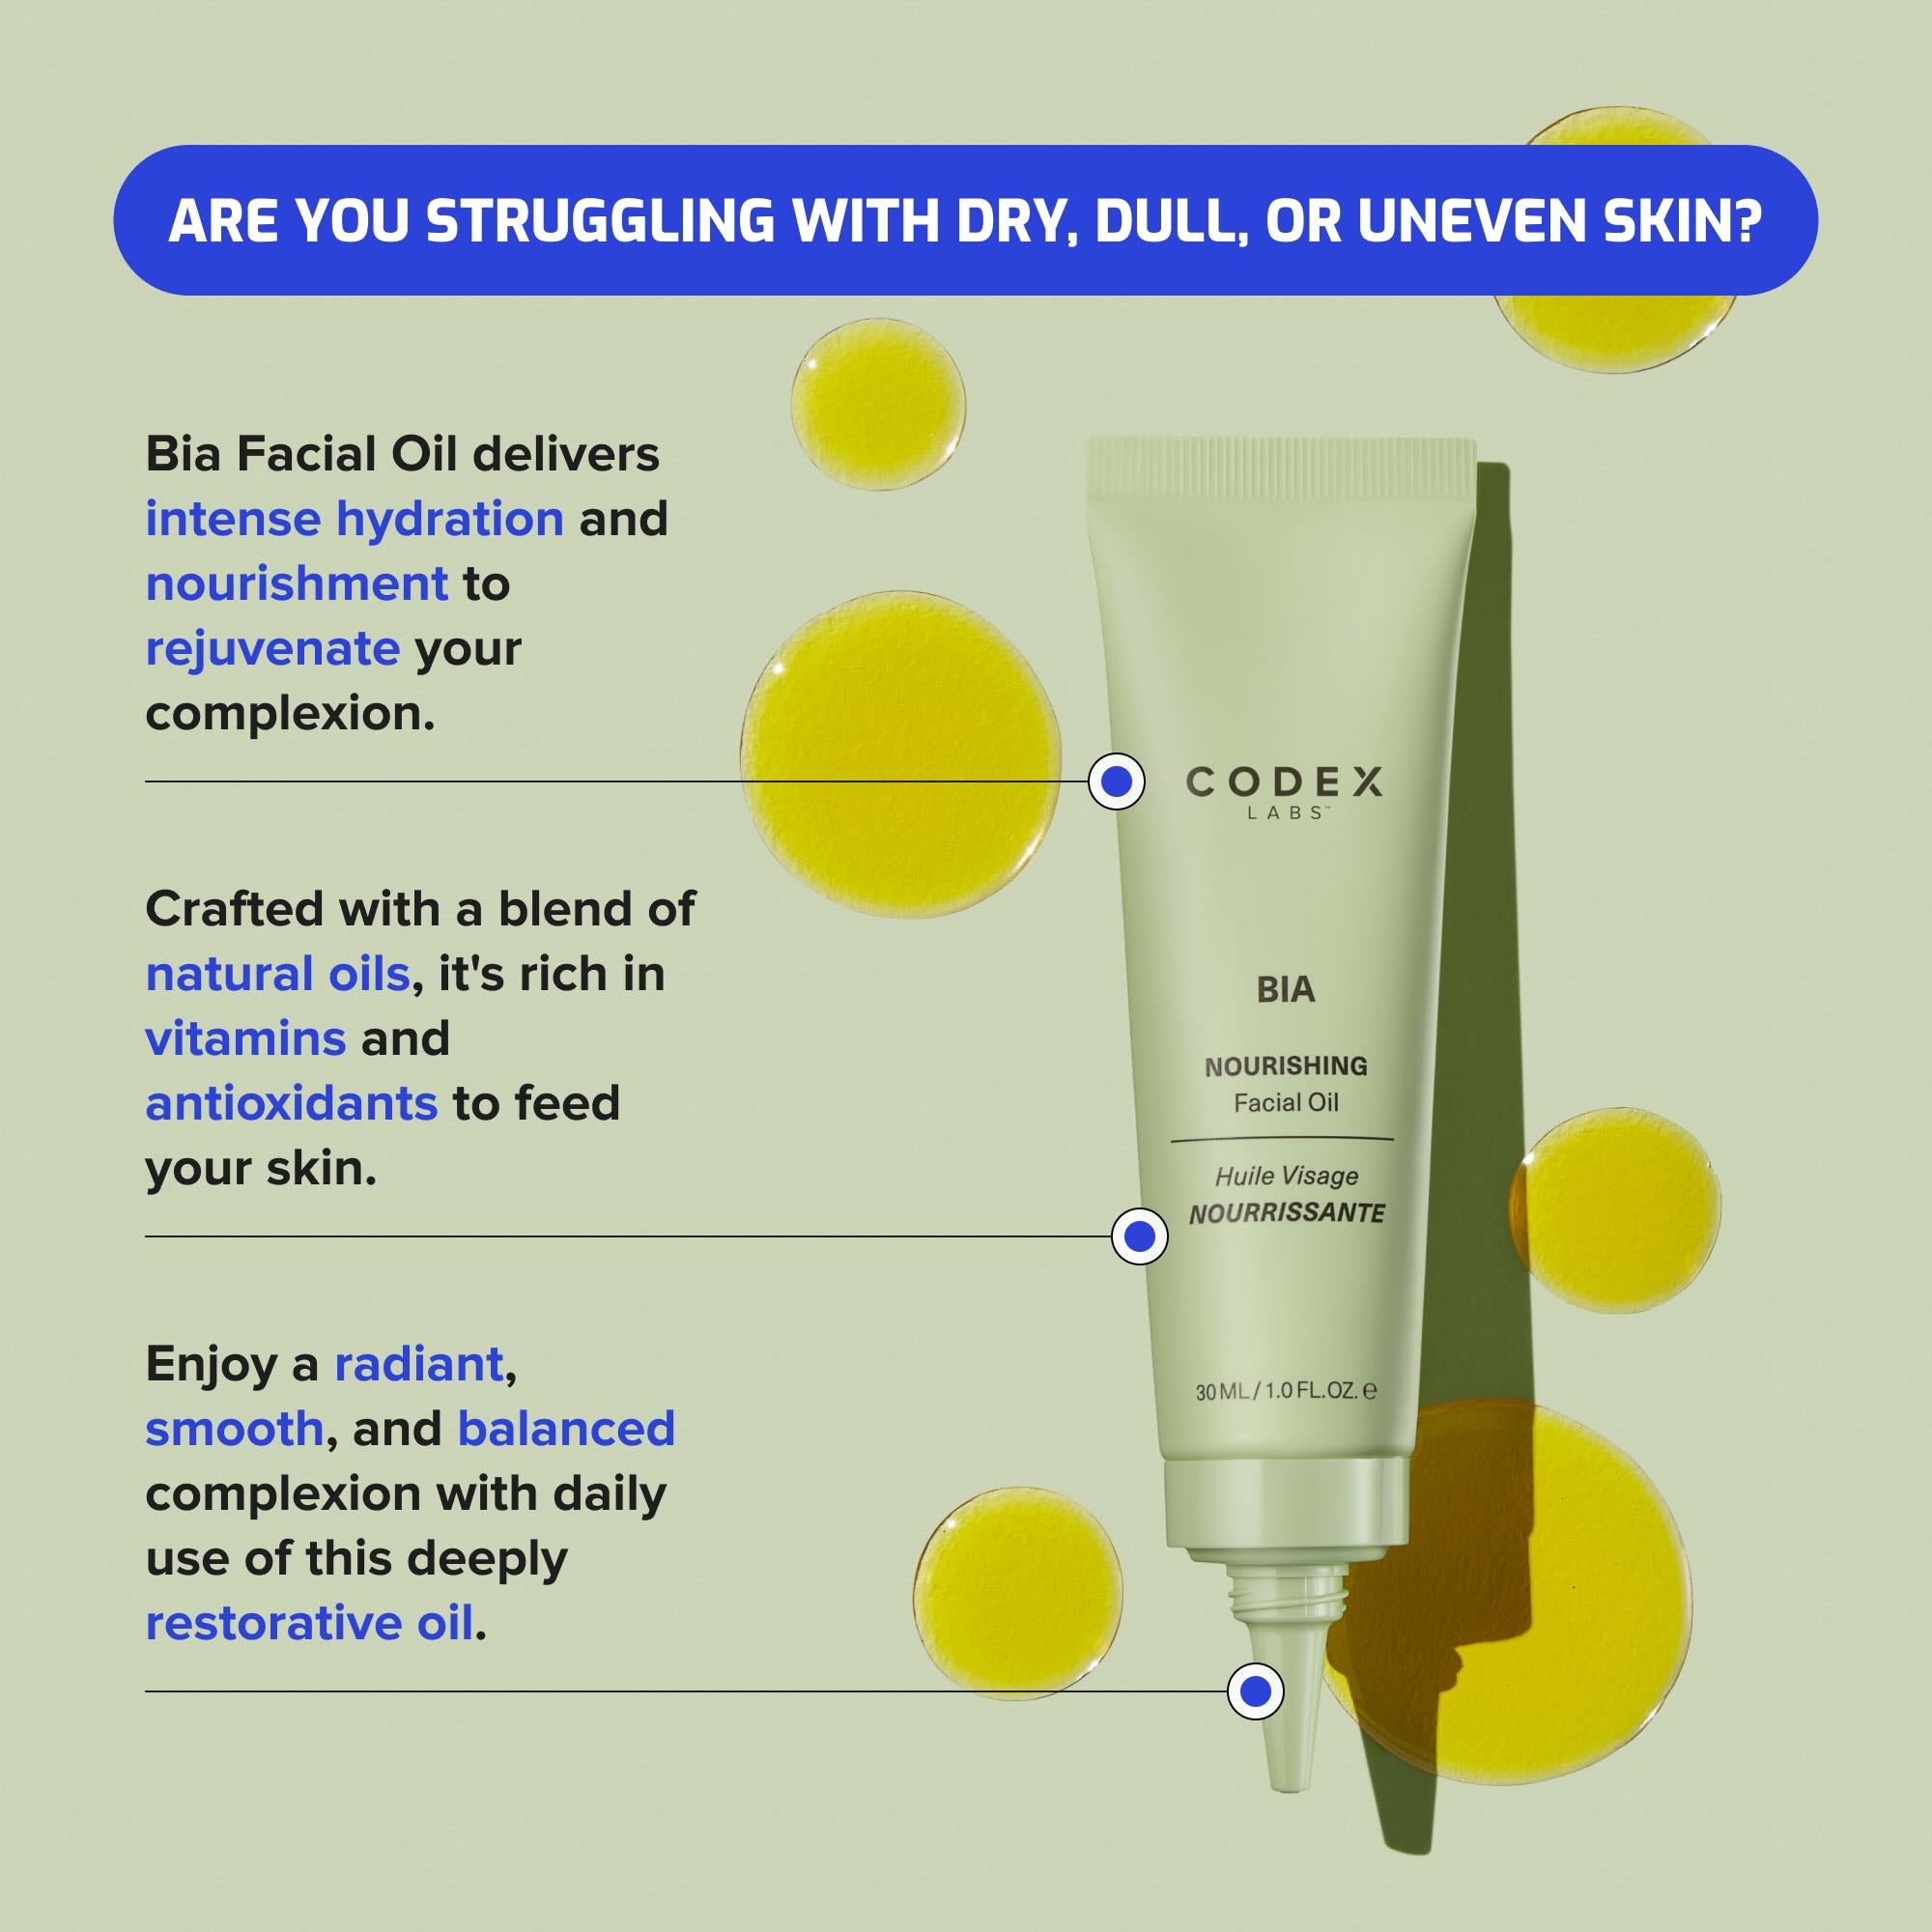 Bia Facial Oil  product benefits infographic.